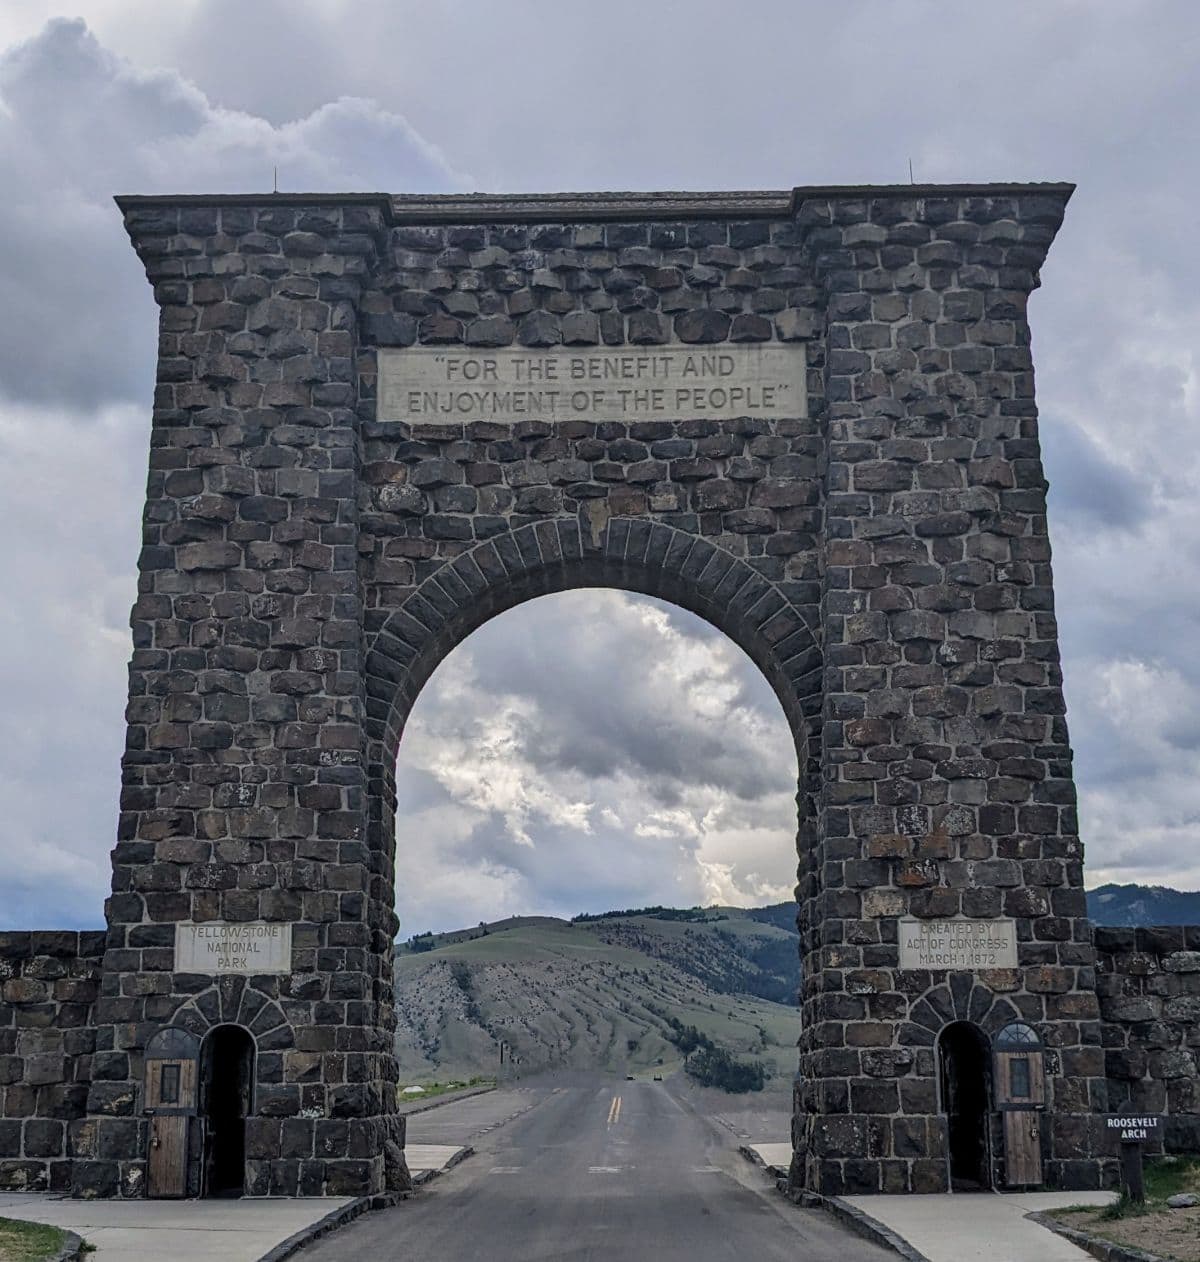 Large stone arch over a roadway with a green hill in the background. At the top of the stone arch there is a chiseled sign that says "For the benefit and enjoyment of the people."